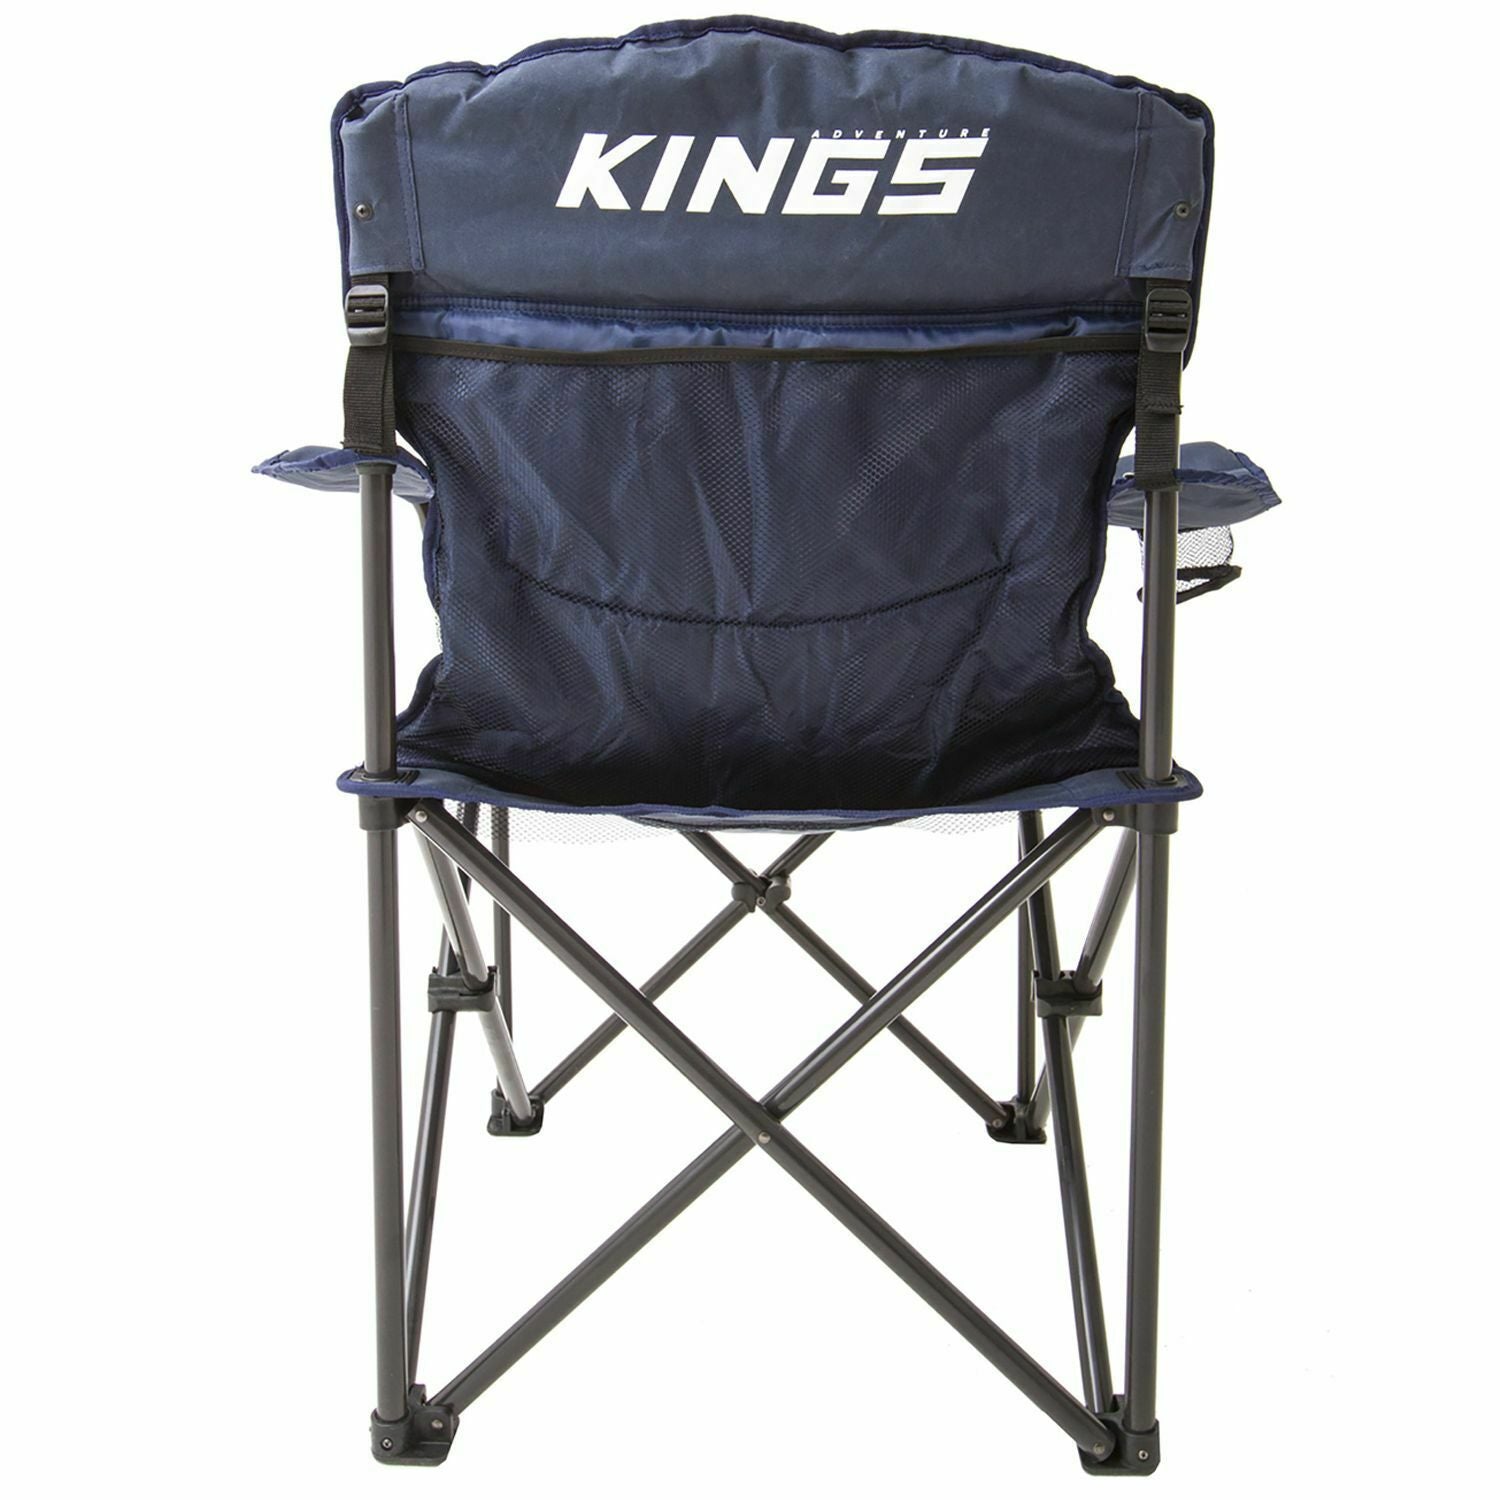 x2 King's Throne Camping Chairs - jmscamping.com